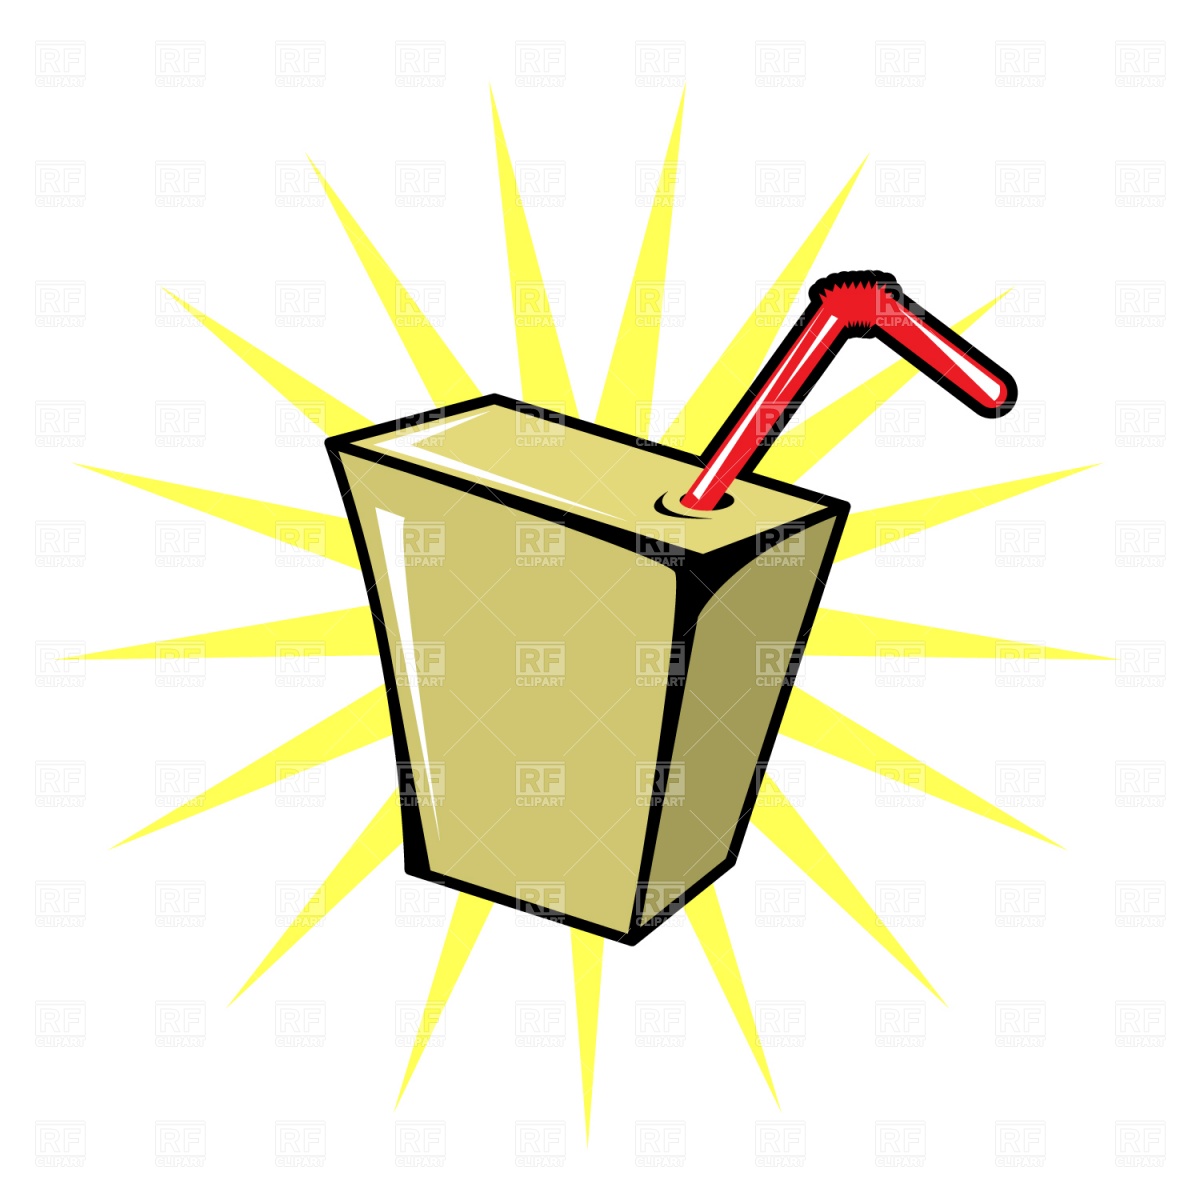 Juice Carton With Straw Download Royalty Free Vector Clipart  Eps